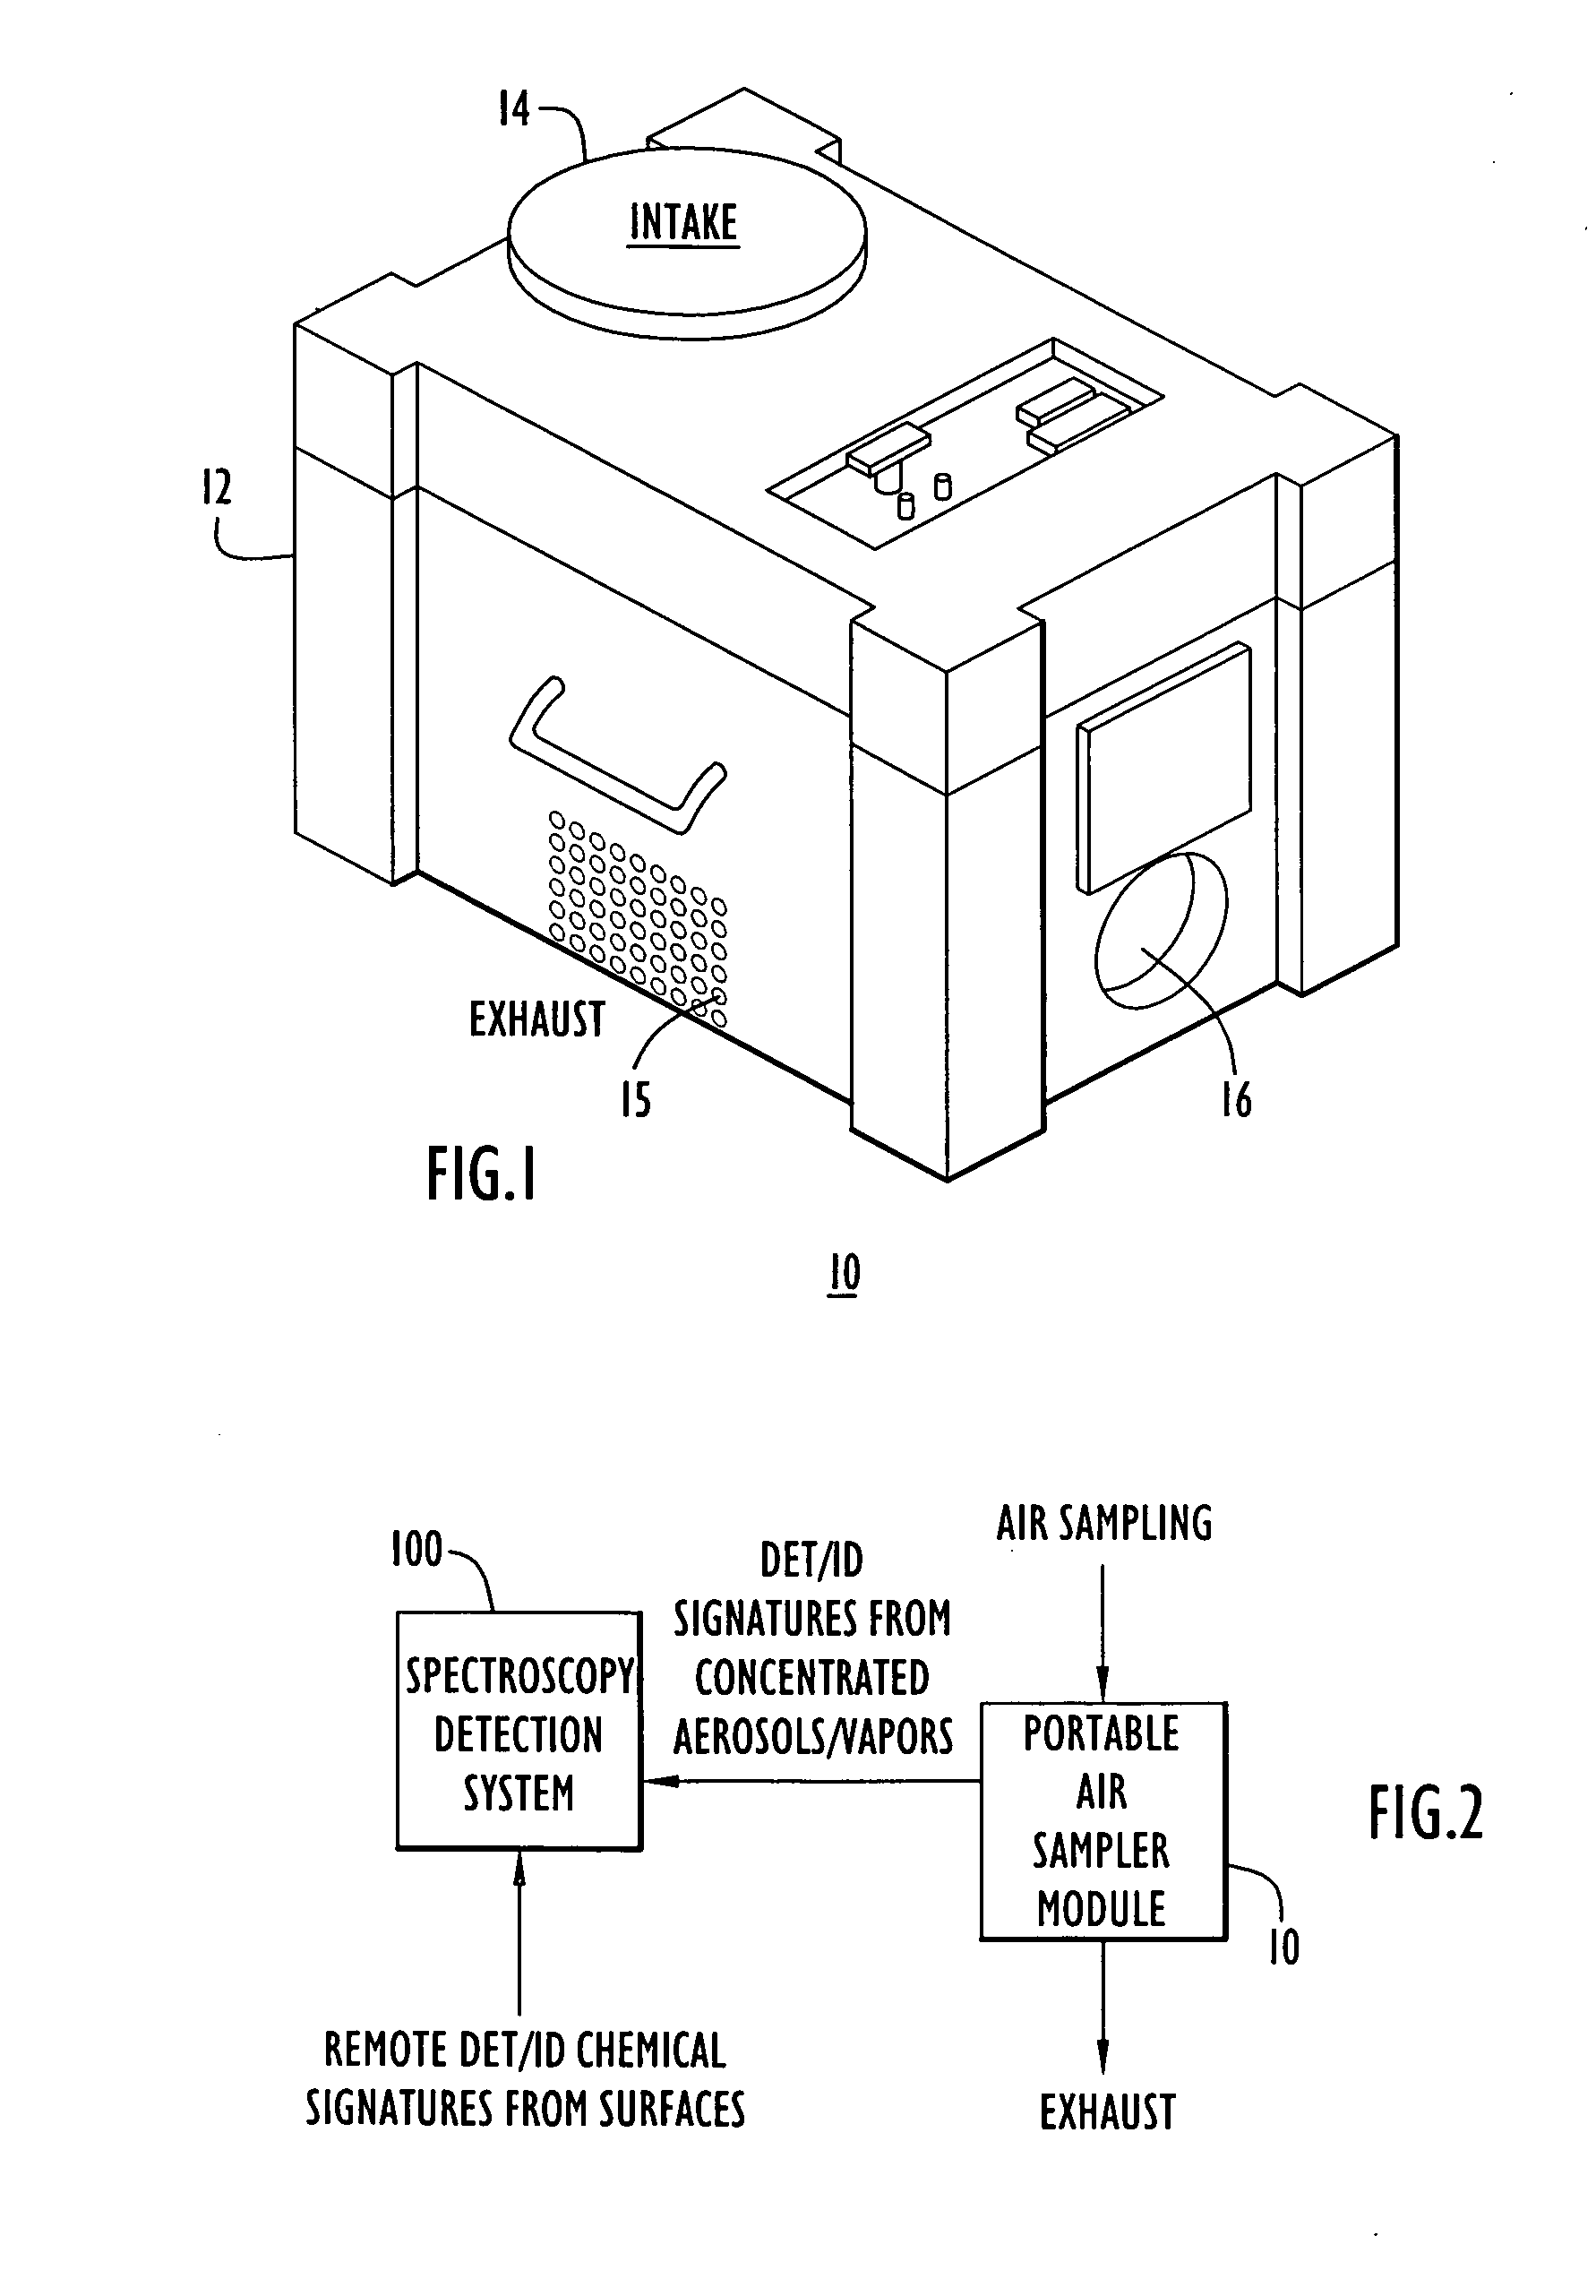 Air sampler module for enhancing the detection capabilities of a chemical detection device or system